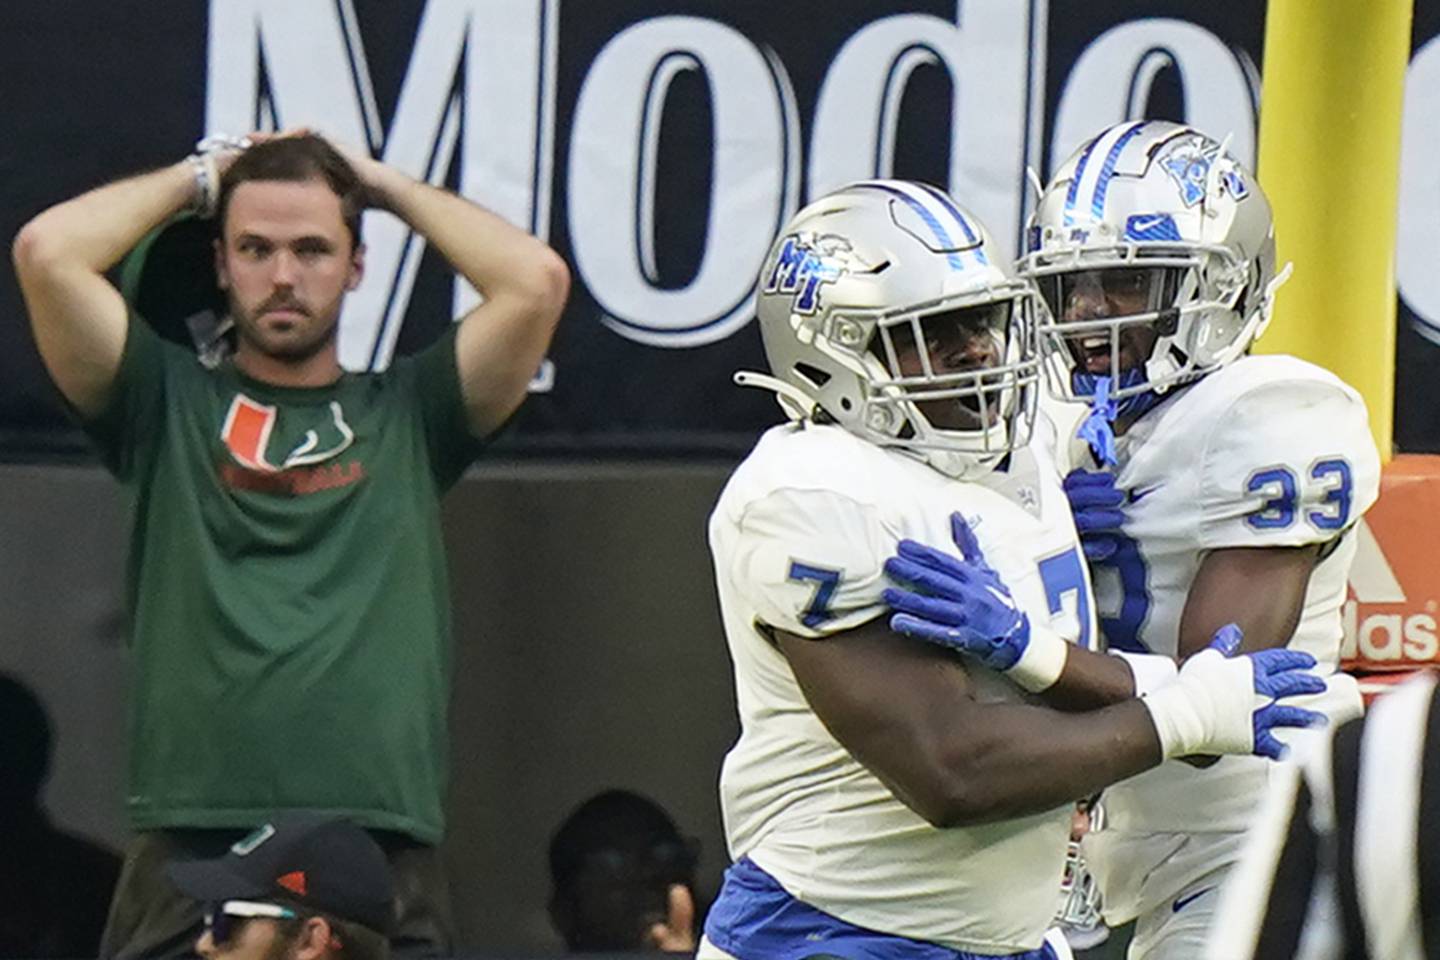 Middle Tennessee defensive tackle Zaylin Wood (7) celebrates with cornerback Decorian Patterson (33) after Wood scored on an interception return against Miami on Sept. 24, 2022, in Miami Gardens, Fla.